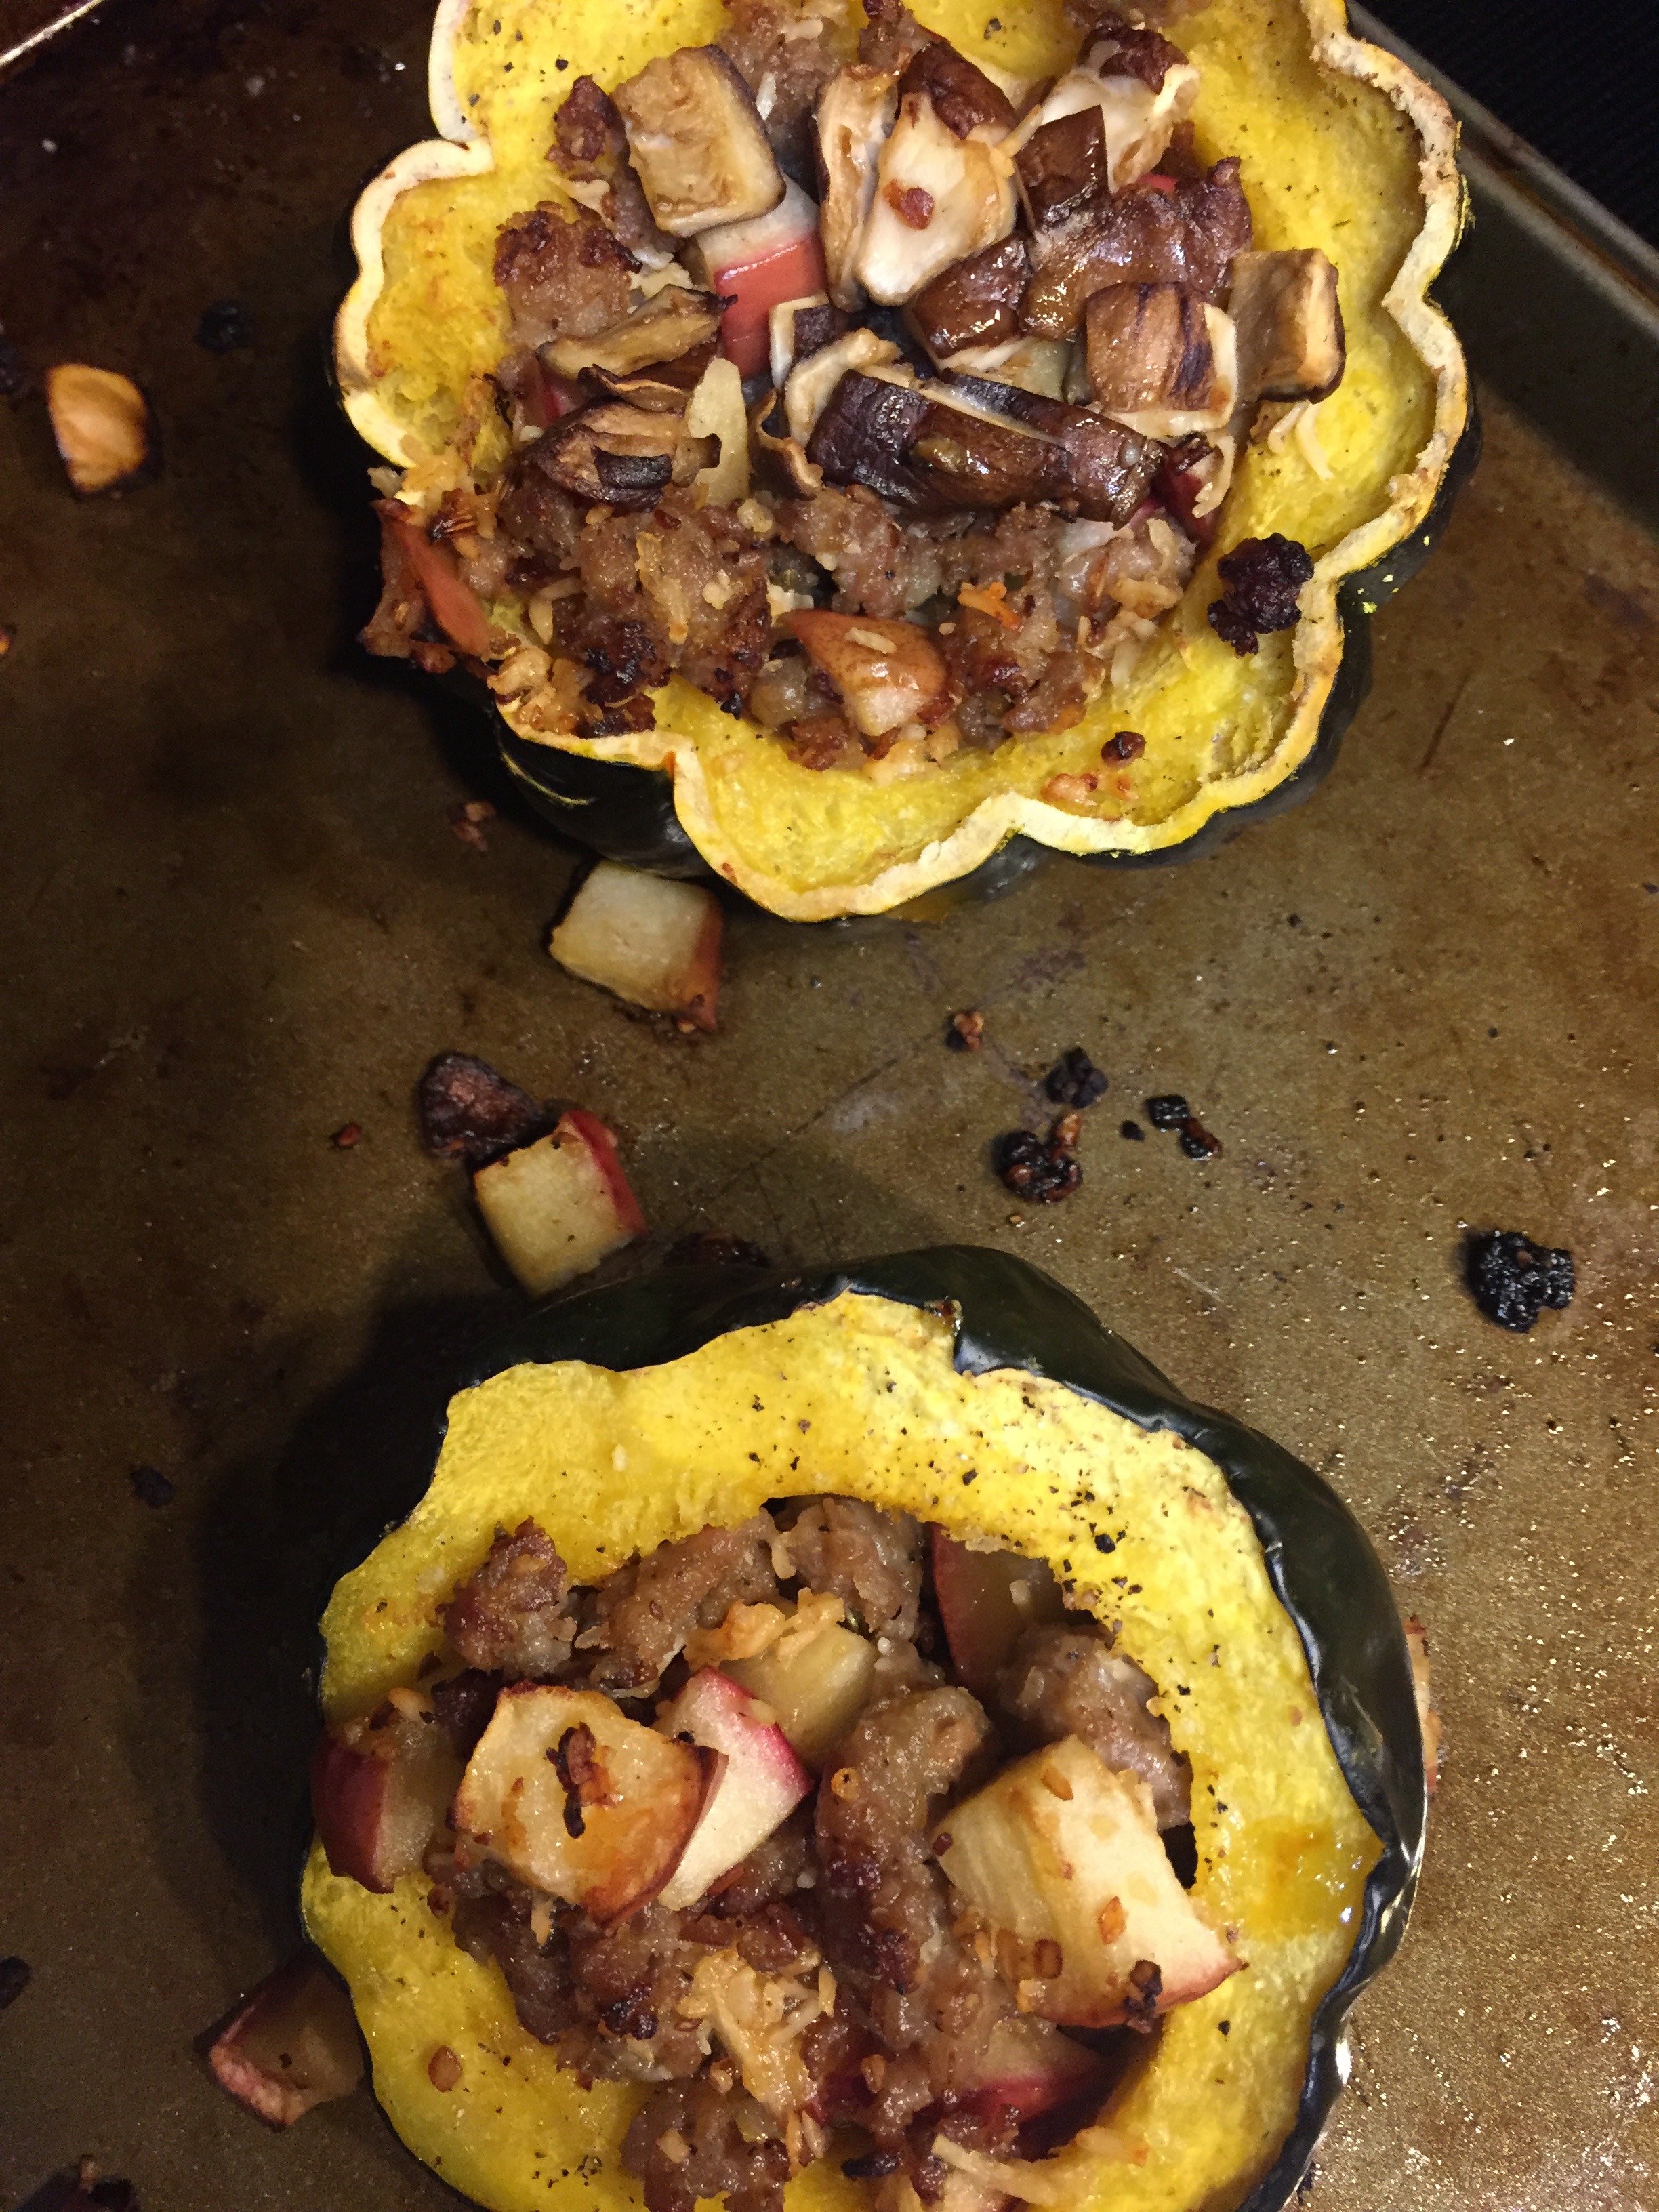 Acorn squash stuffed with apple and sausage